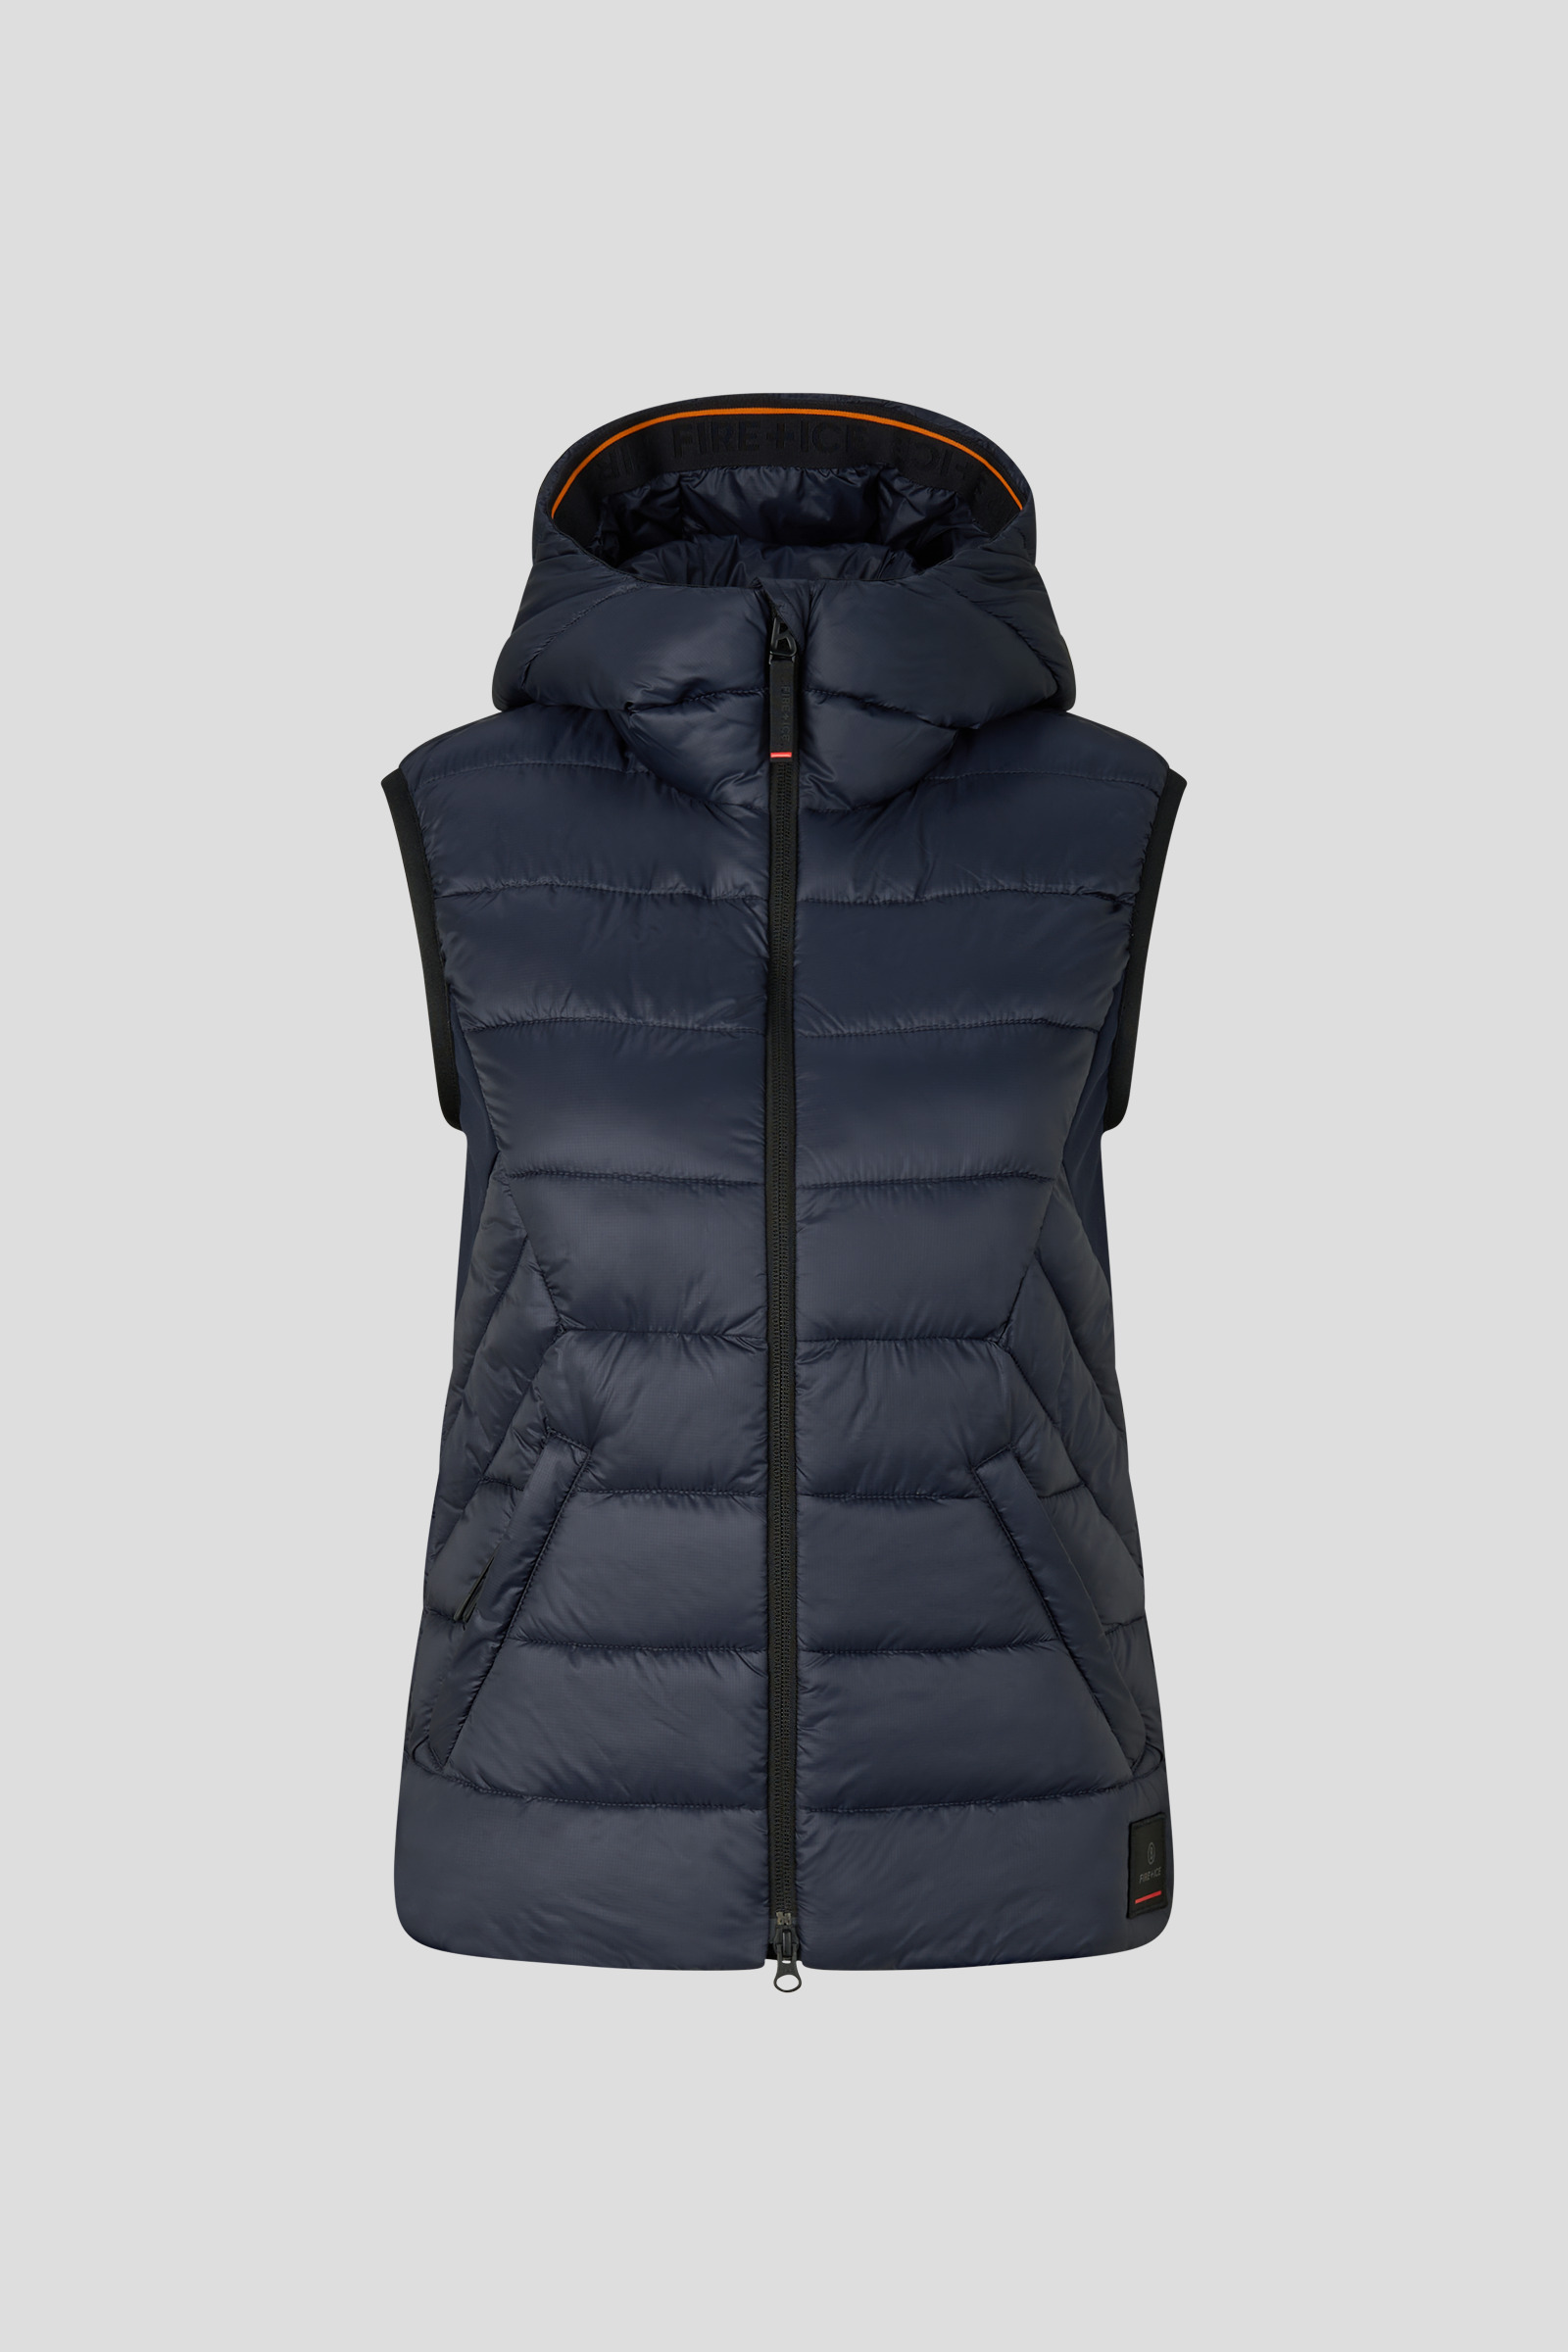 FIRE+ICE Karyn Quilted gilet for women